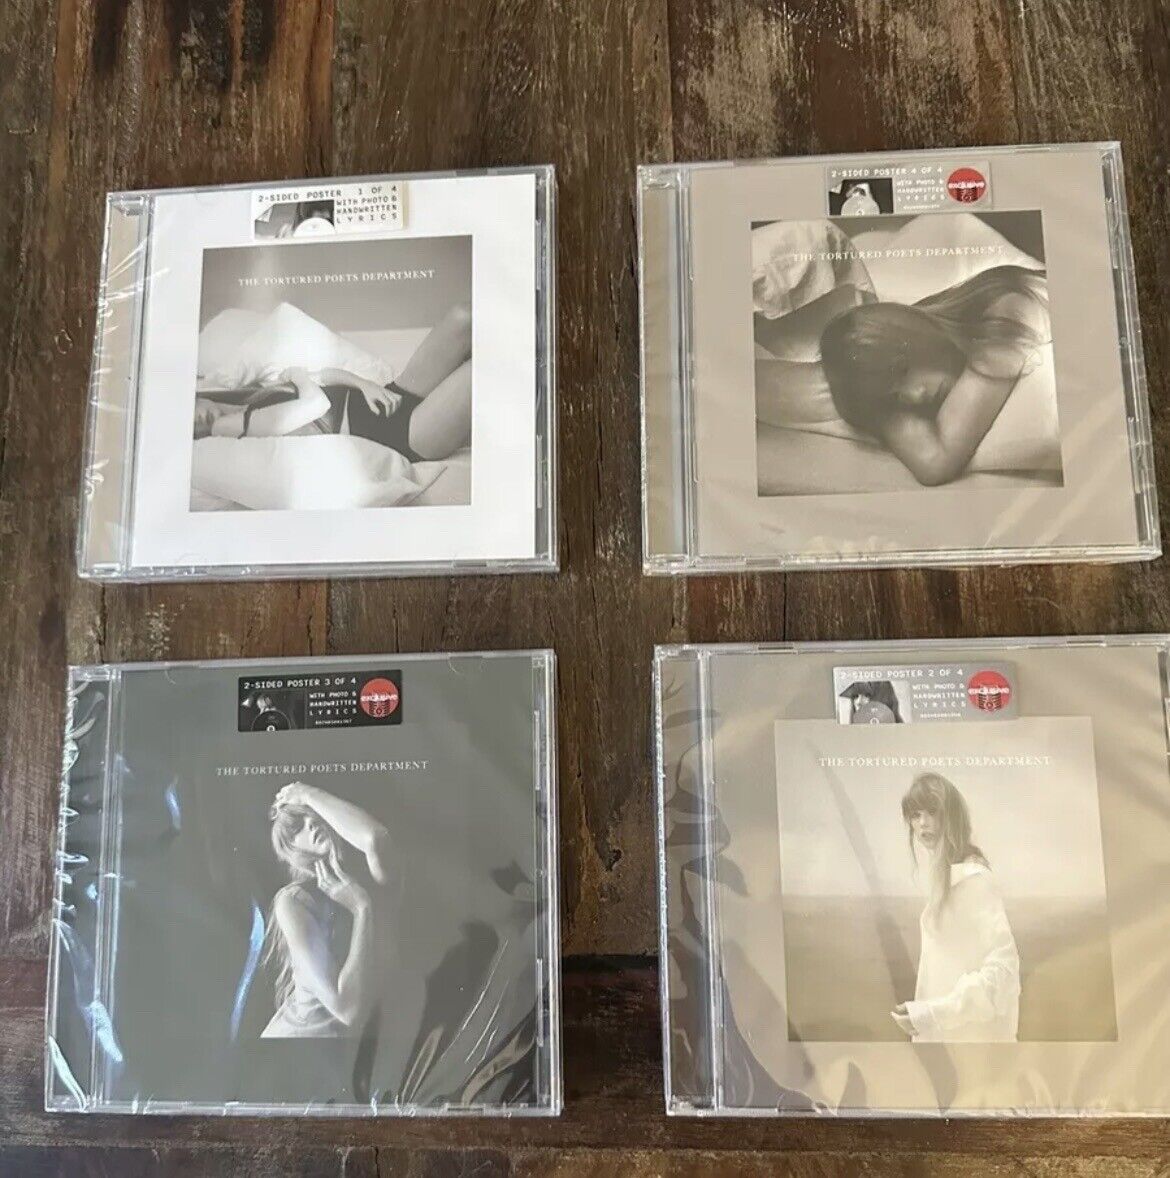 Taylor Swift Tortured Poets Department CDs Complete With Set of 4 With Posters